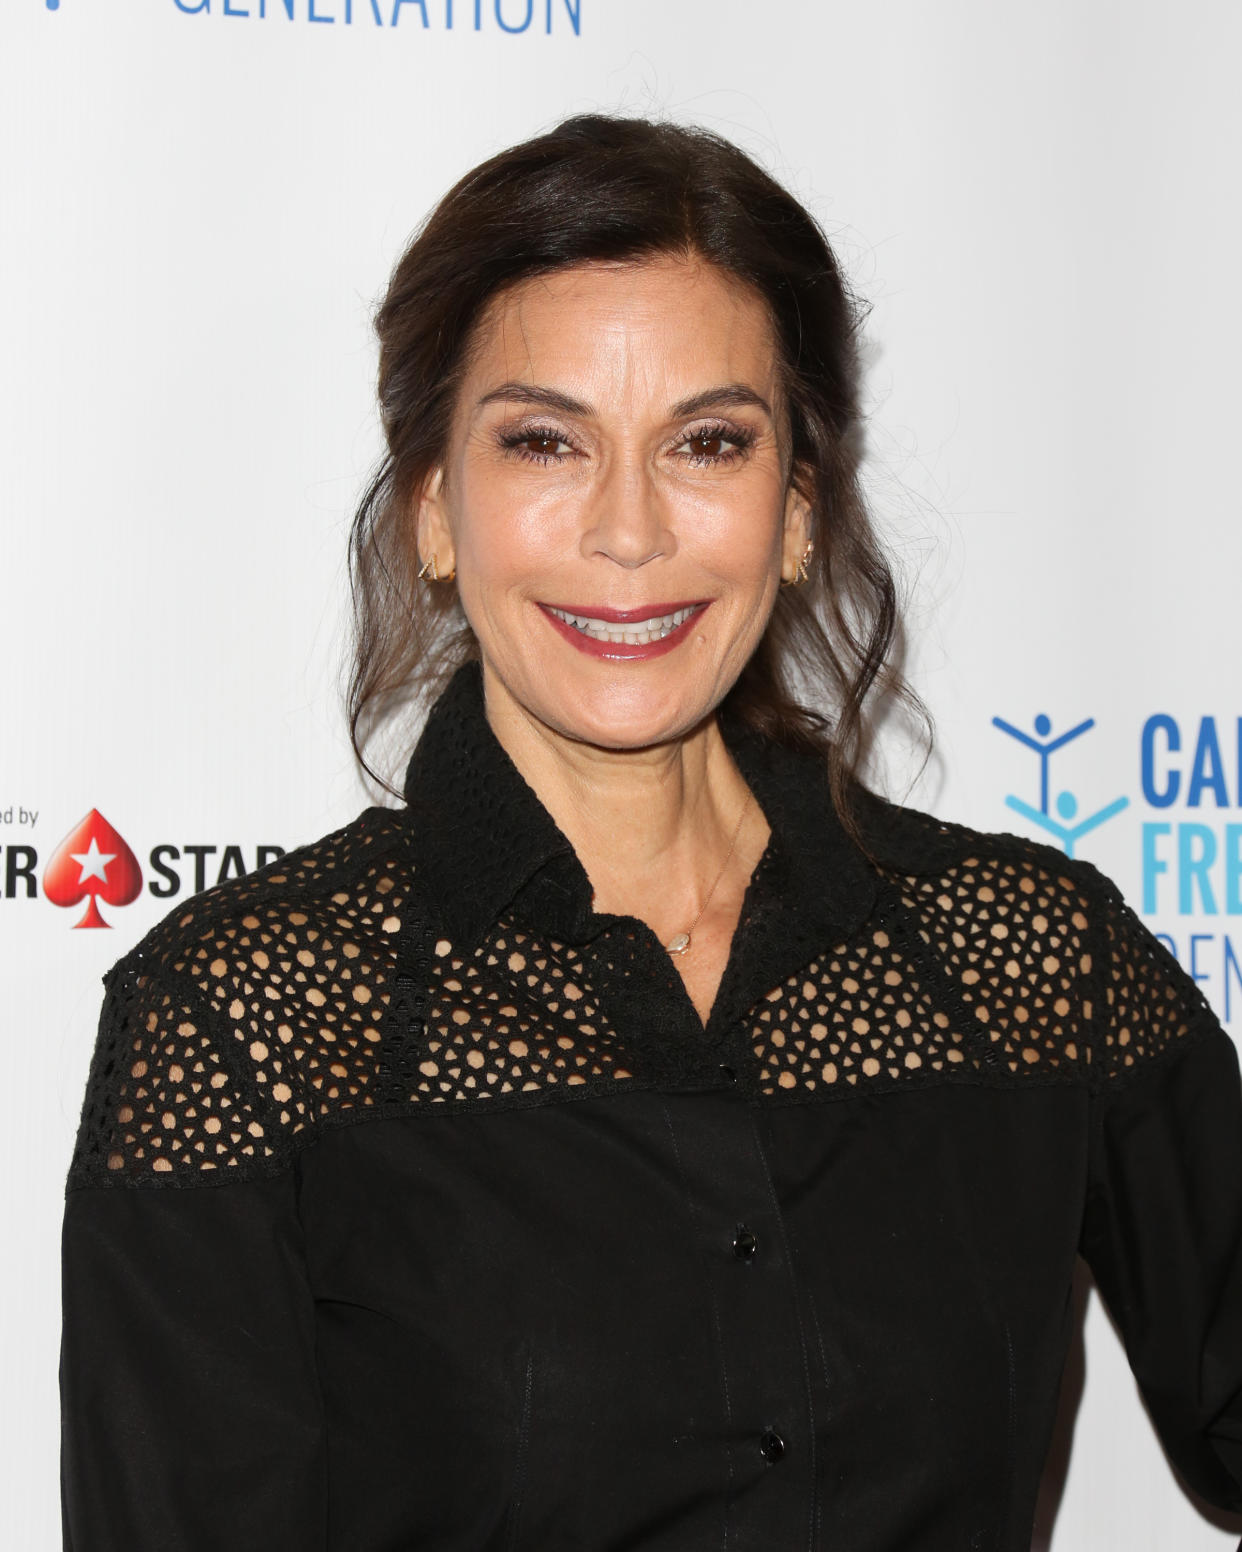 Teri Hatcher’s last public appearance in the U.S. was at the 4th annual Ante Up for a Cancer-Free Generation Poker Tournament and Casino Night in June. (Photo: Paul Archuleta/Getty Images)